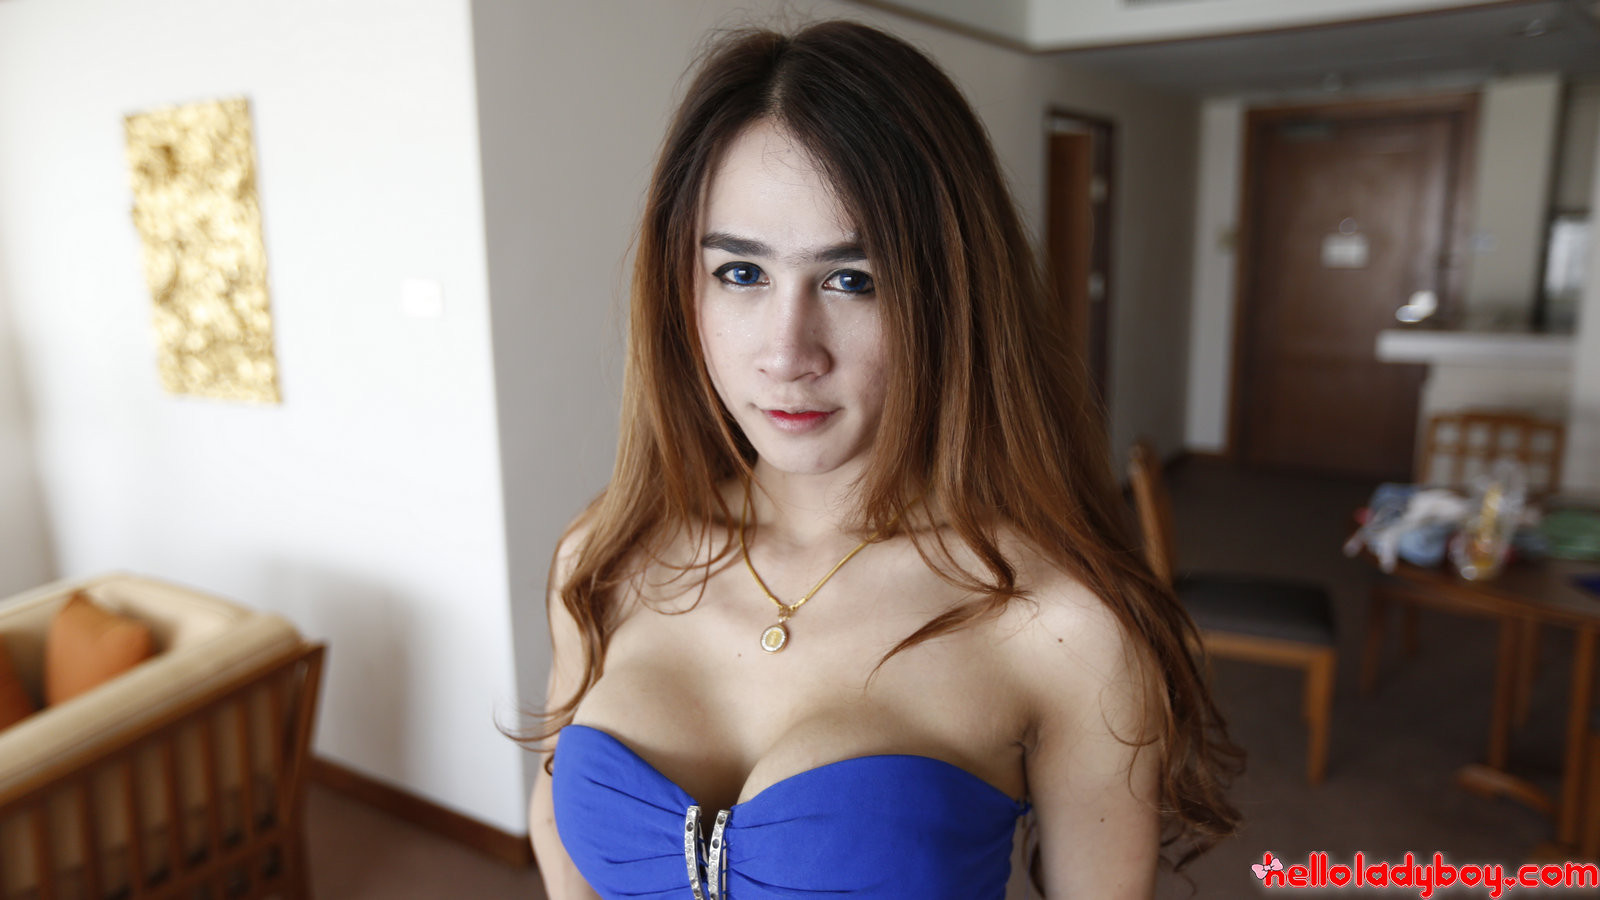 Thai ladyboy with fine unsuitable titties and lengthy hair will get facial